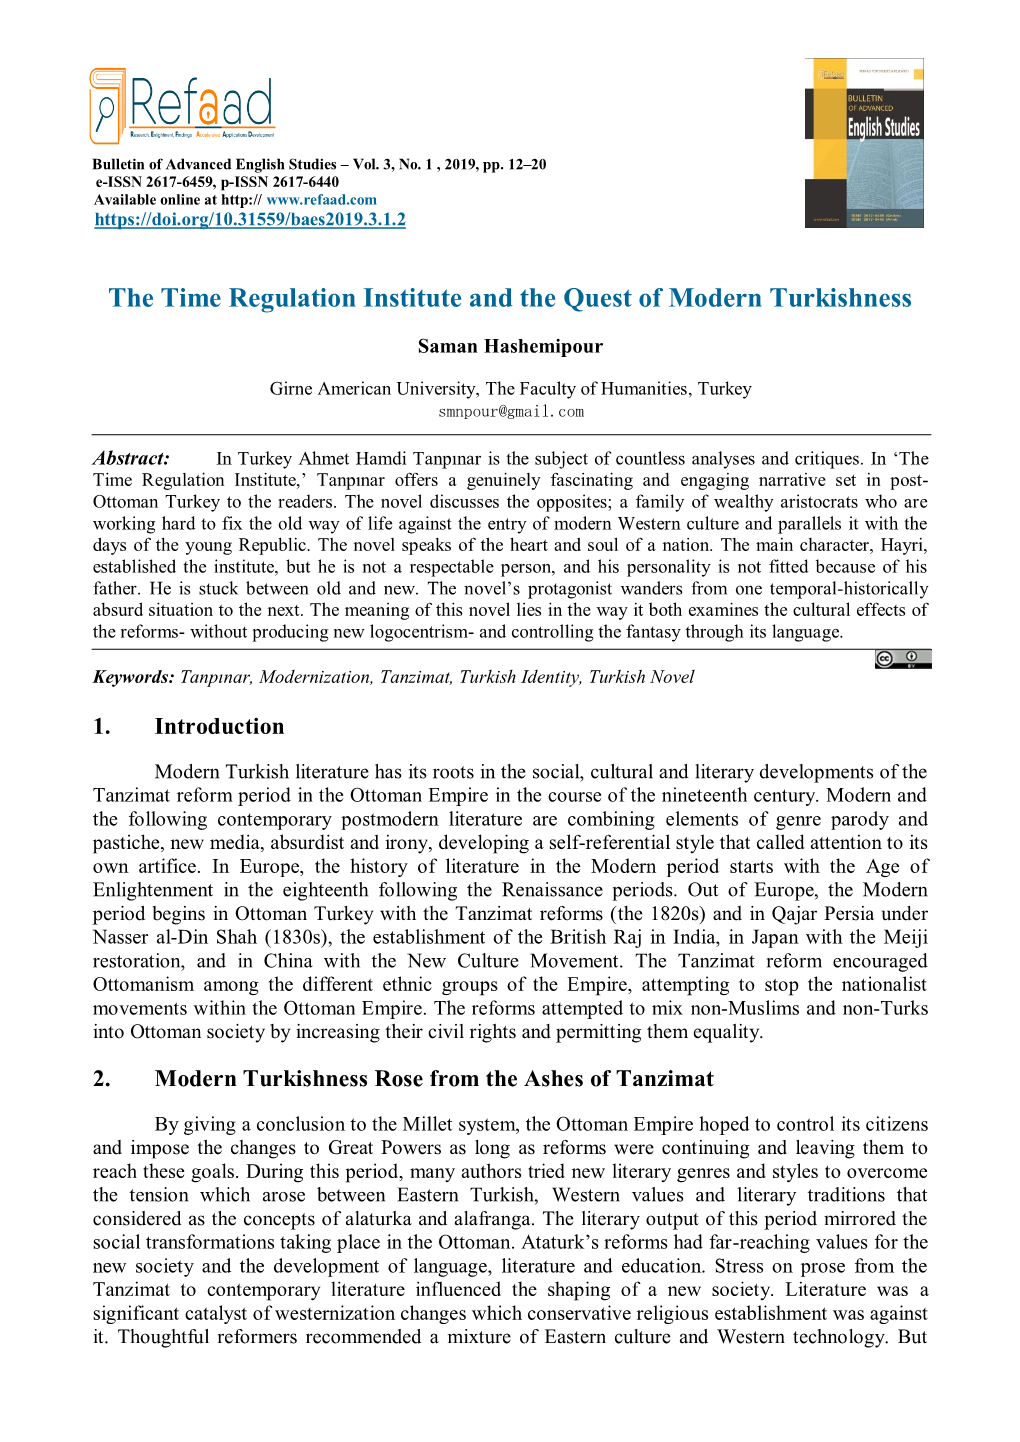 The Time Regulation Institute and the Quest of Modern Turkishness